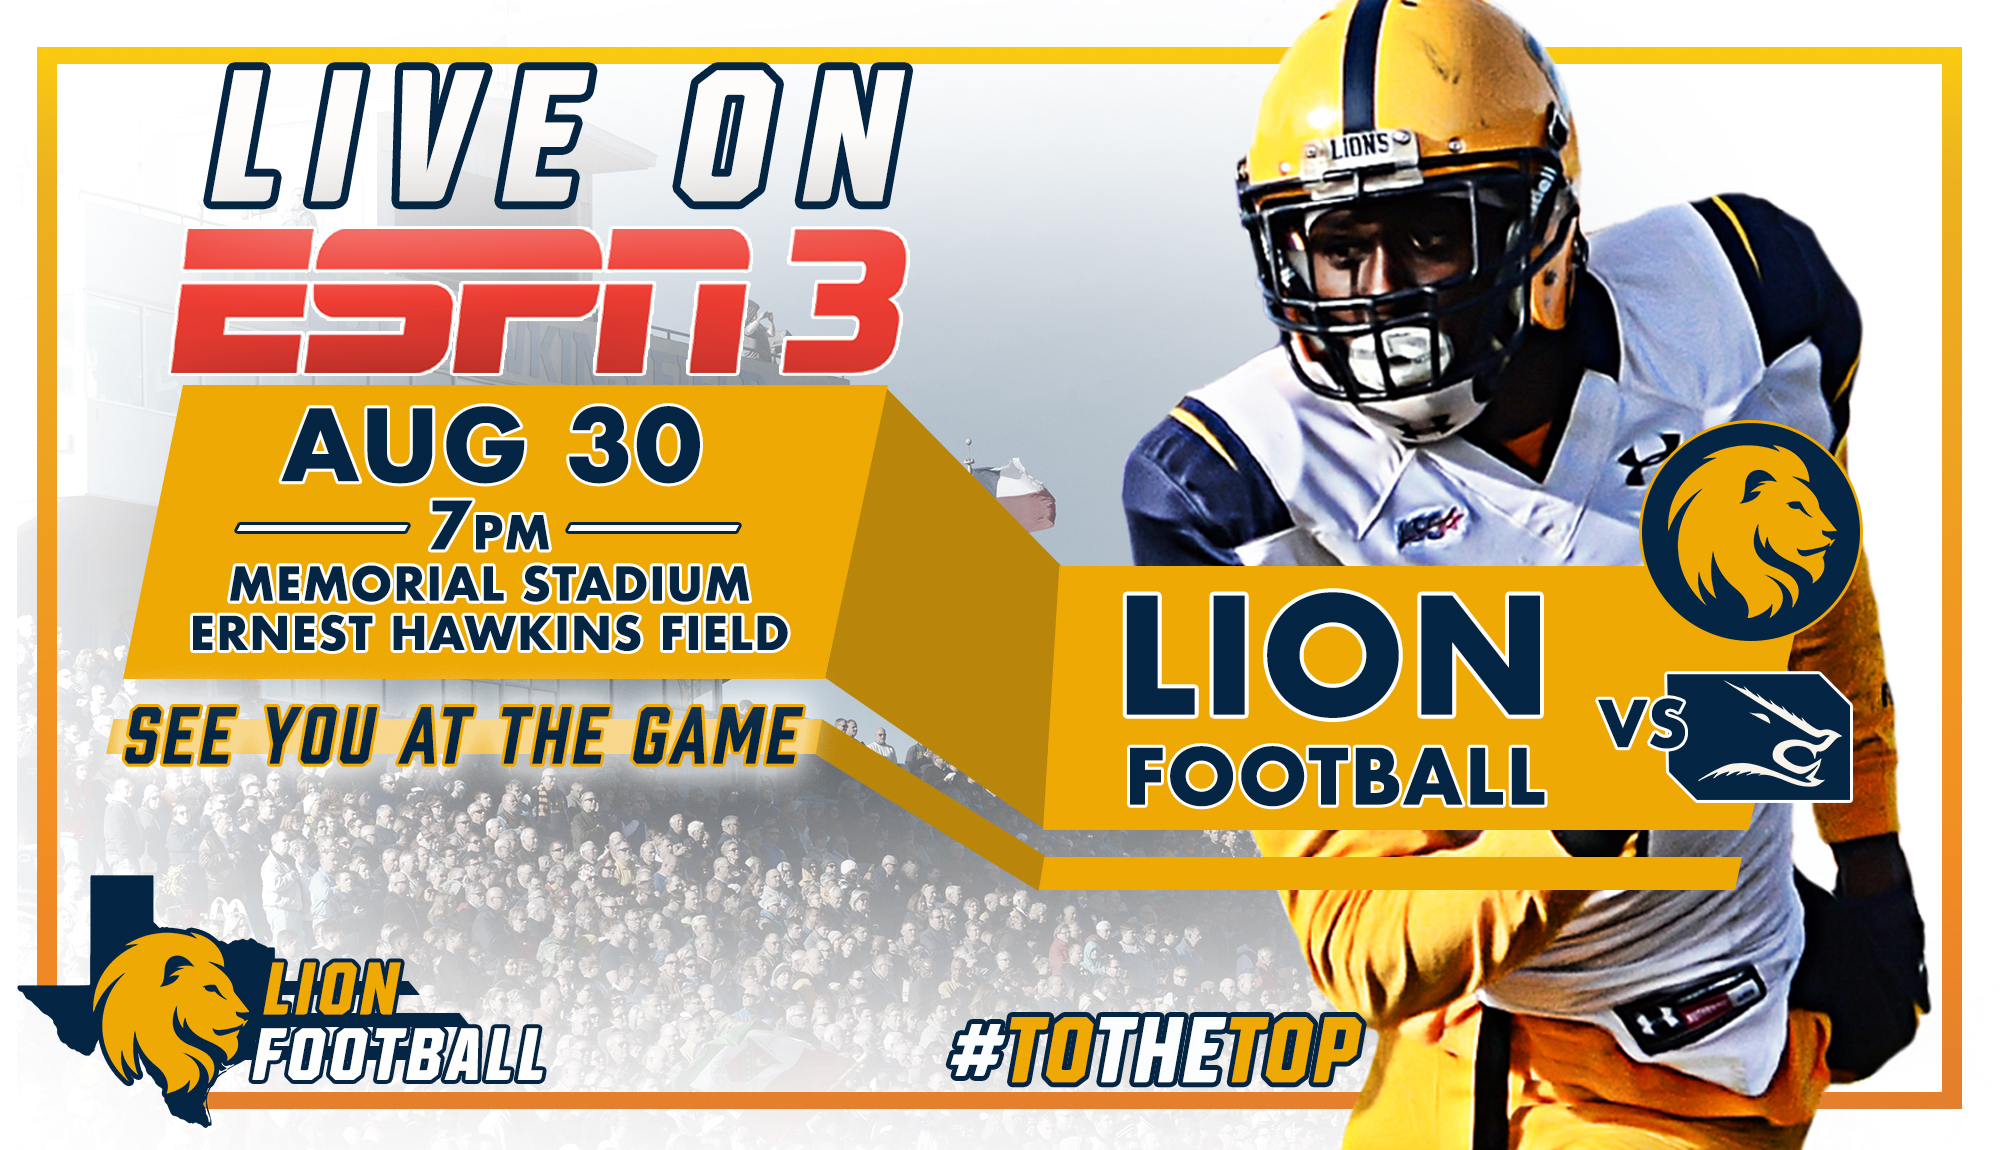 No. 1 Texas A&M Commerce Lions’ season opener vs. A&M-Kingsville to be nationally televised on ESPN3 as part of Division II Showcase